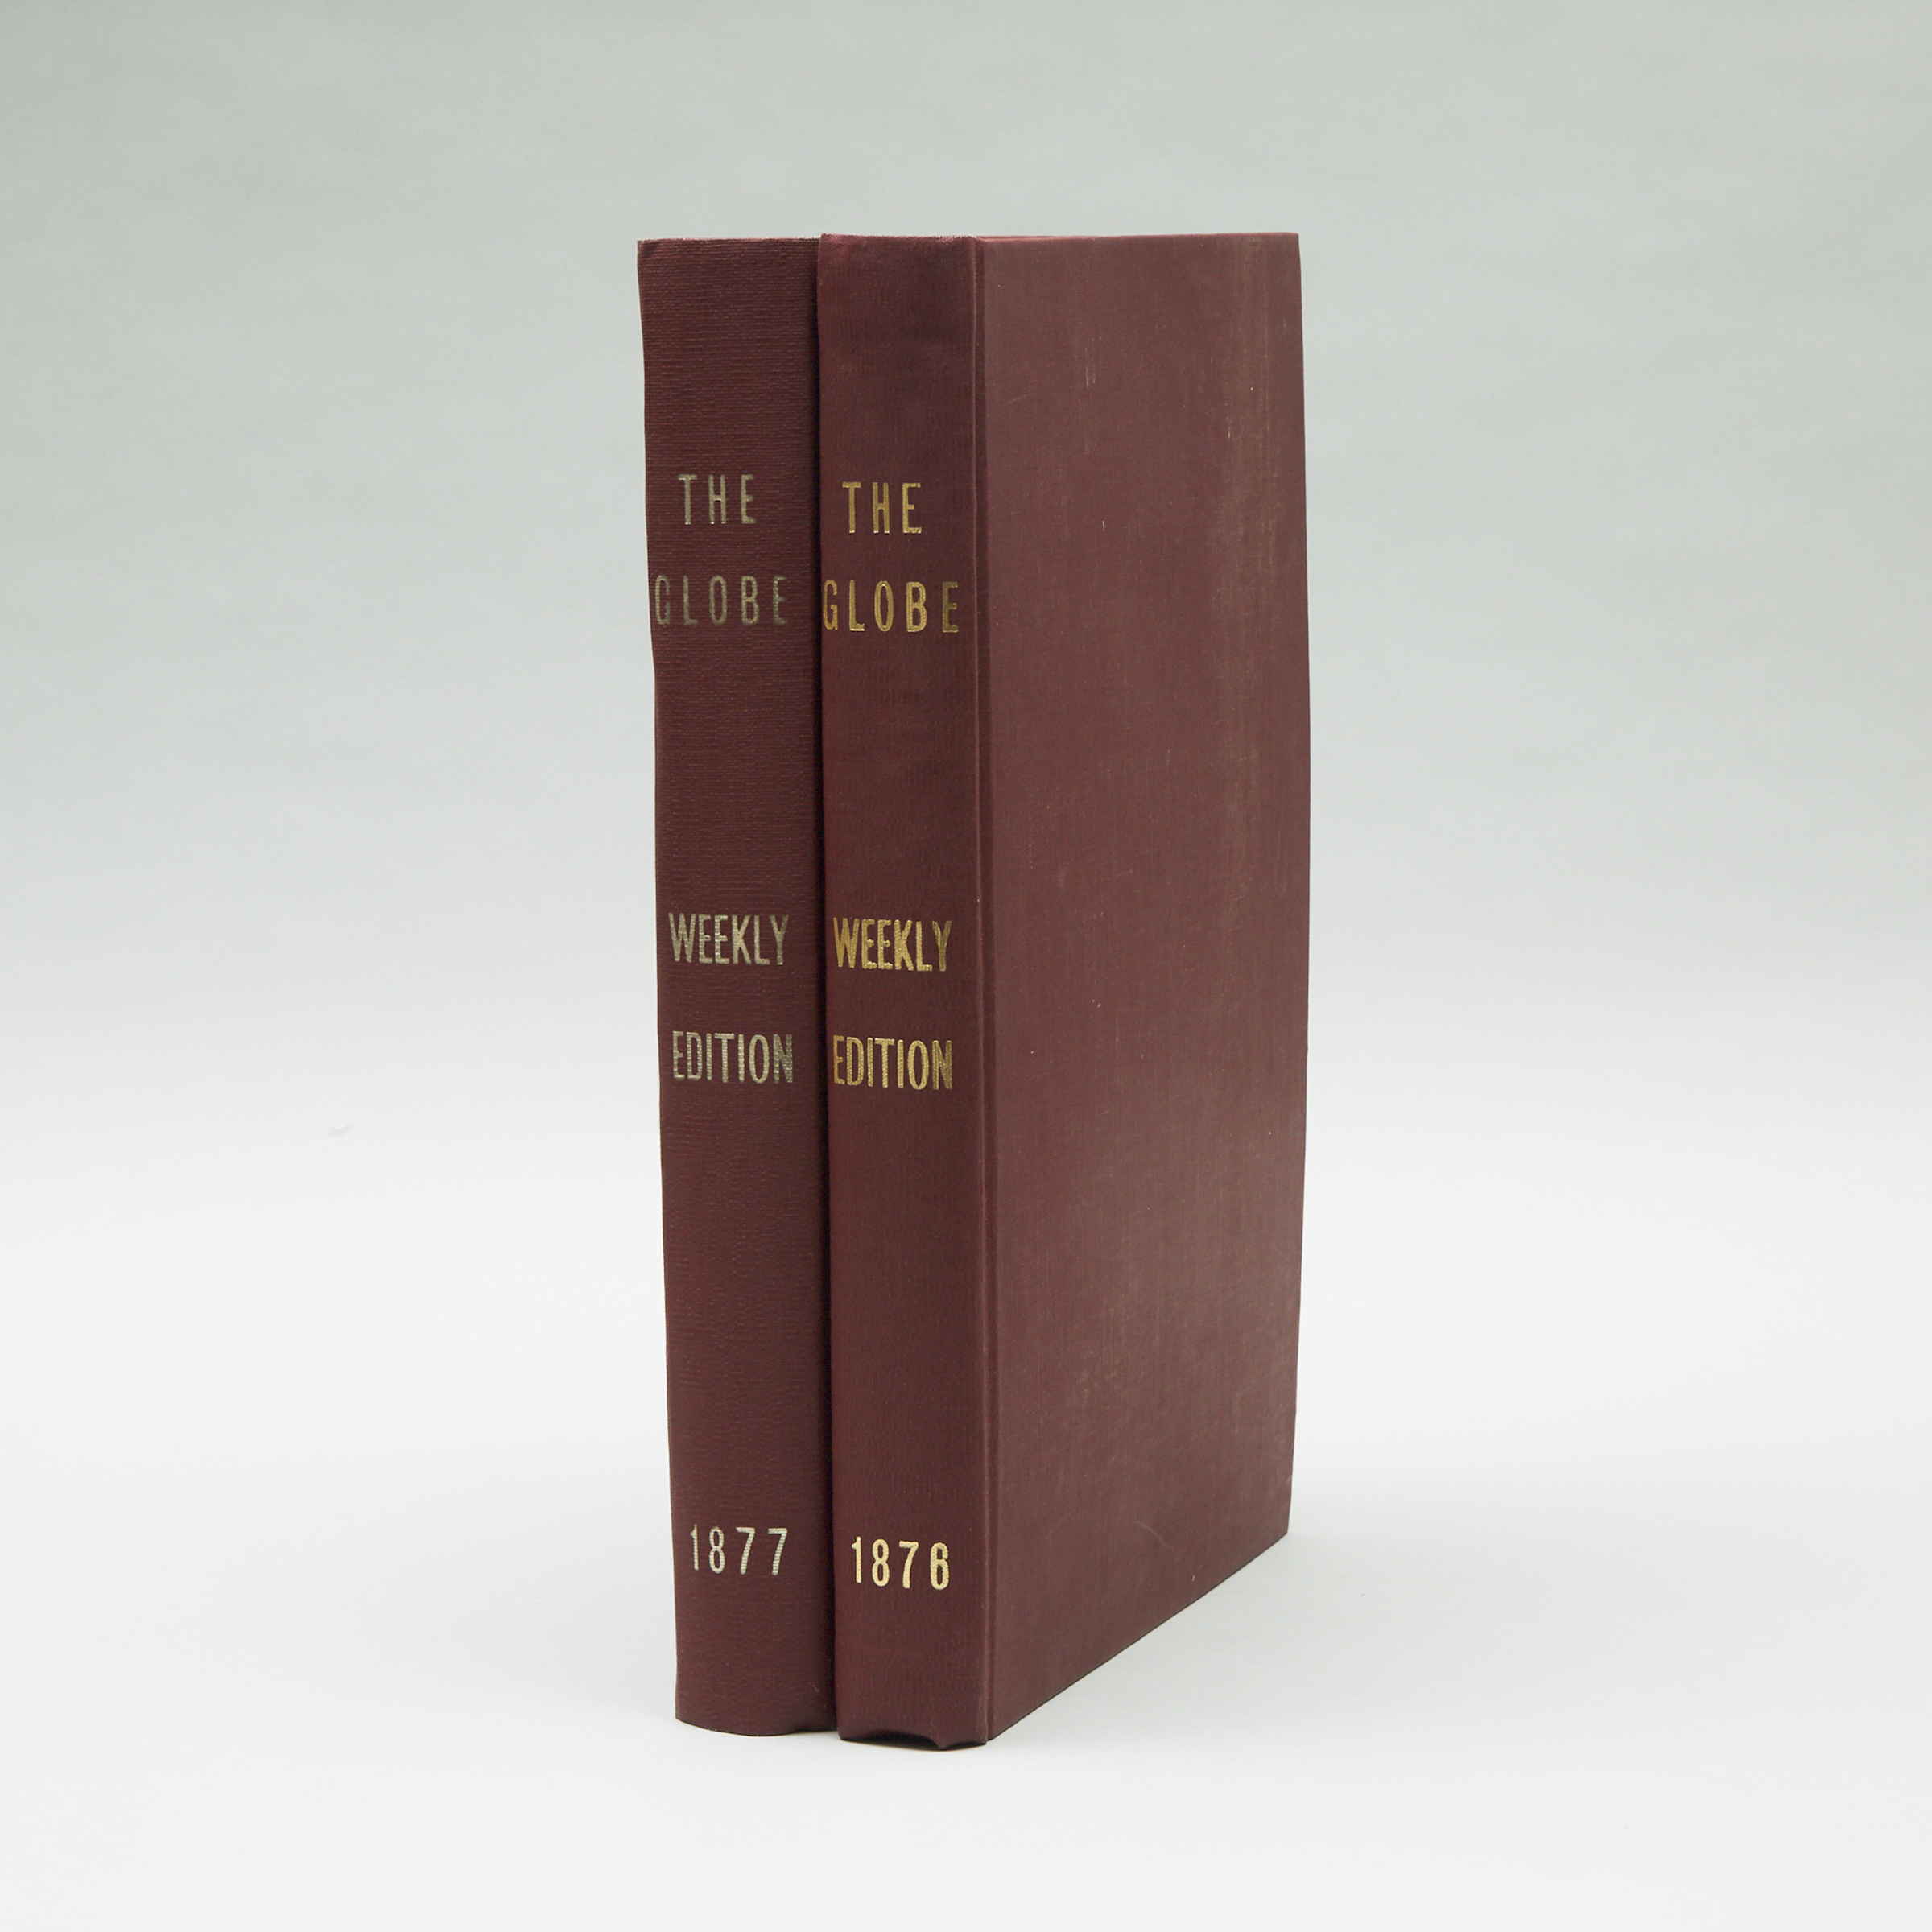 Two Bound Volumes of The Weekly Globe Newspaper, 1876 and 1877